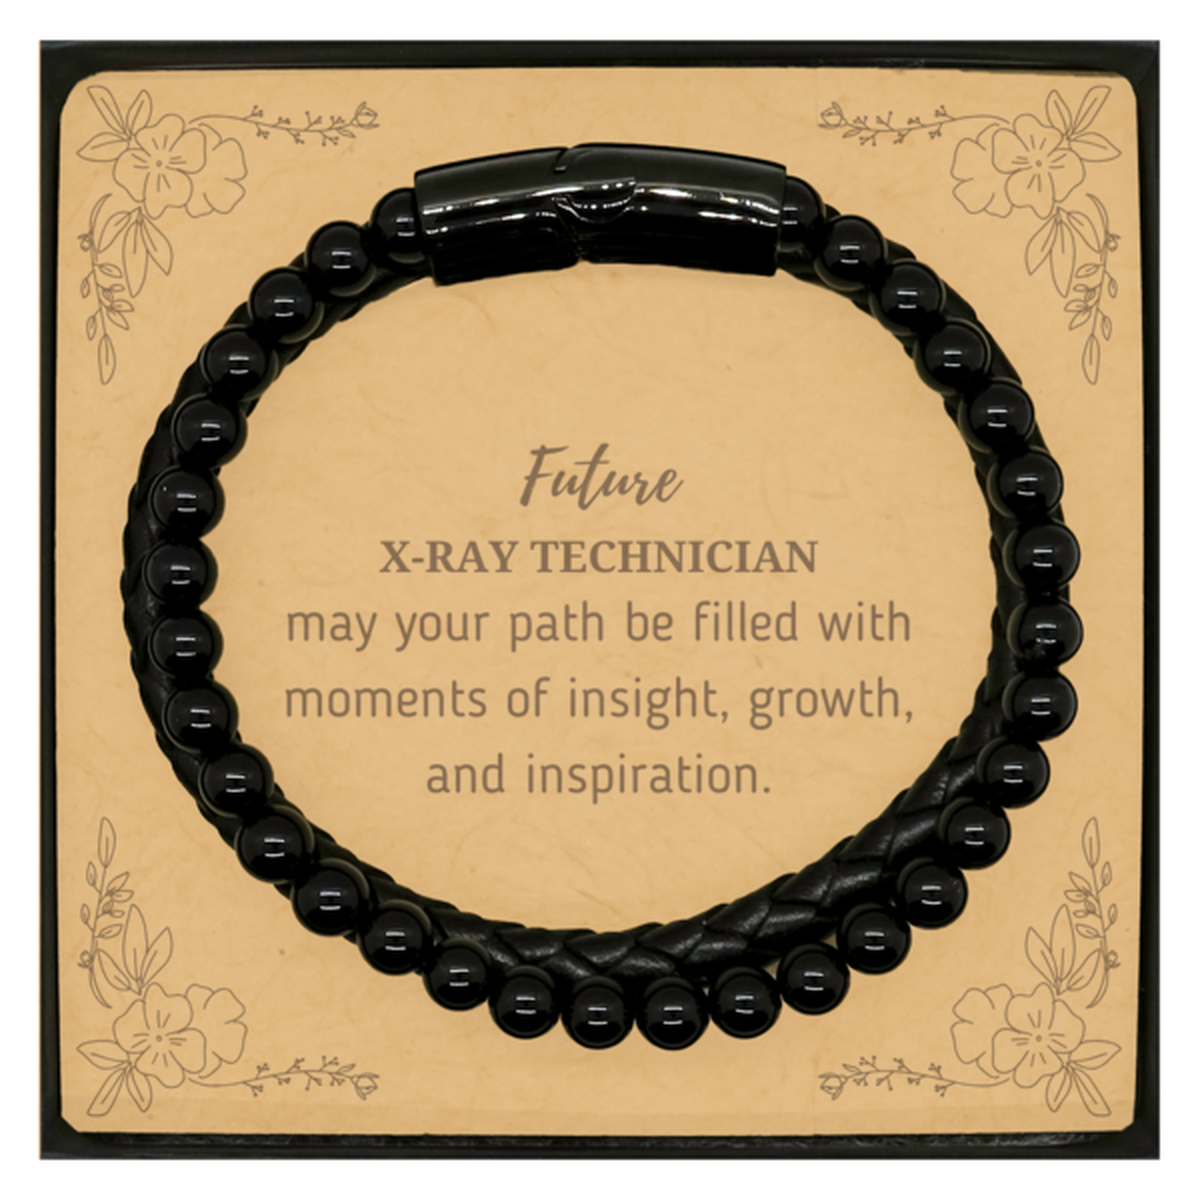 Future X-Ray Technician Gifts, May your path be filled with moments of insight, Graduation Gifts for New X-Ray Technician, Christmas Unique Stone Leather Bracelets For Men, Women, Friends